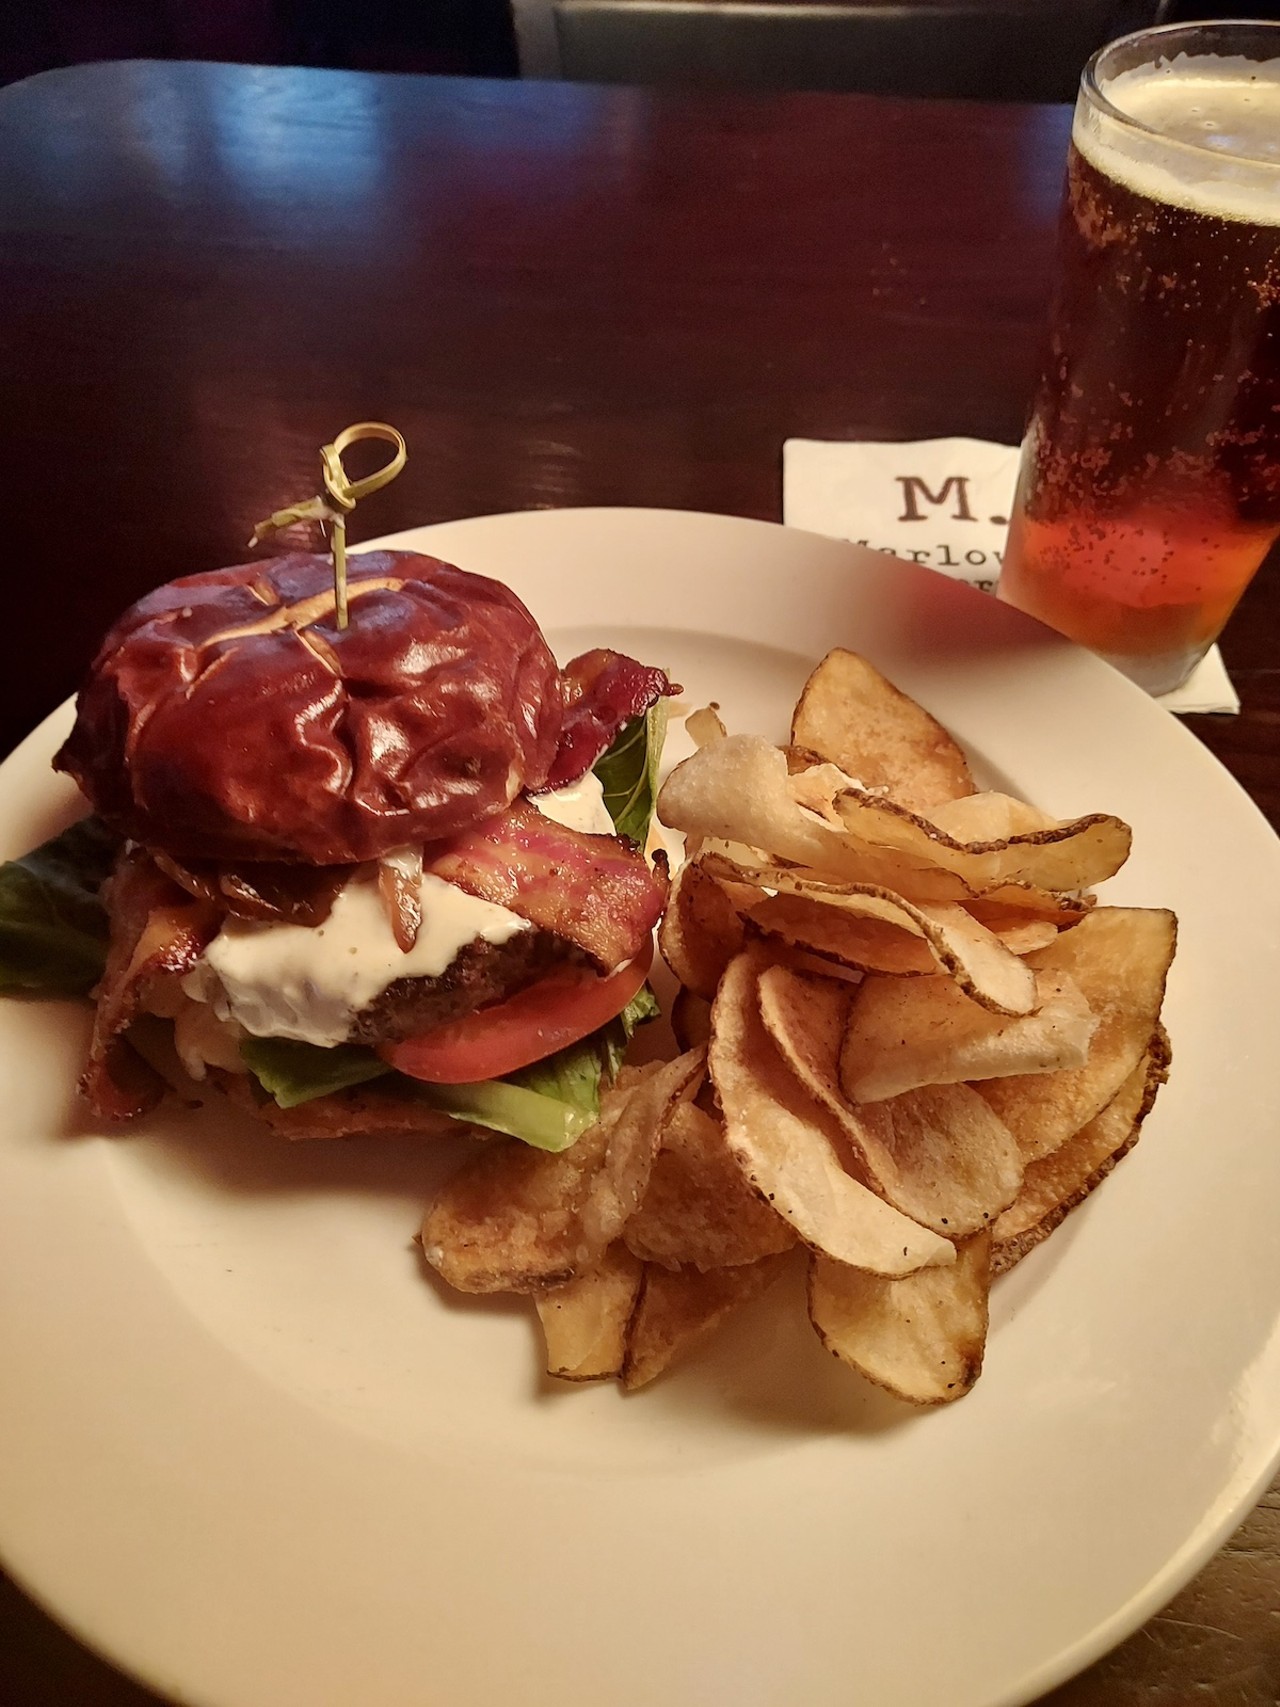 
Marlow's Tavern
13134 N Dale Mabry Hwy., Tampa
Bacon & Brie Burger:  Grill Tavern Burger topped with melted brie, hickory-smoked bacon, caramelized onions, lettuce and tomato served on a pretzel bun. ($12)
Photo courtesy of Marlow's Tavern